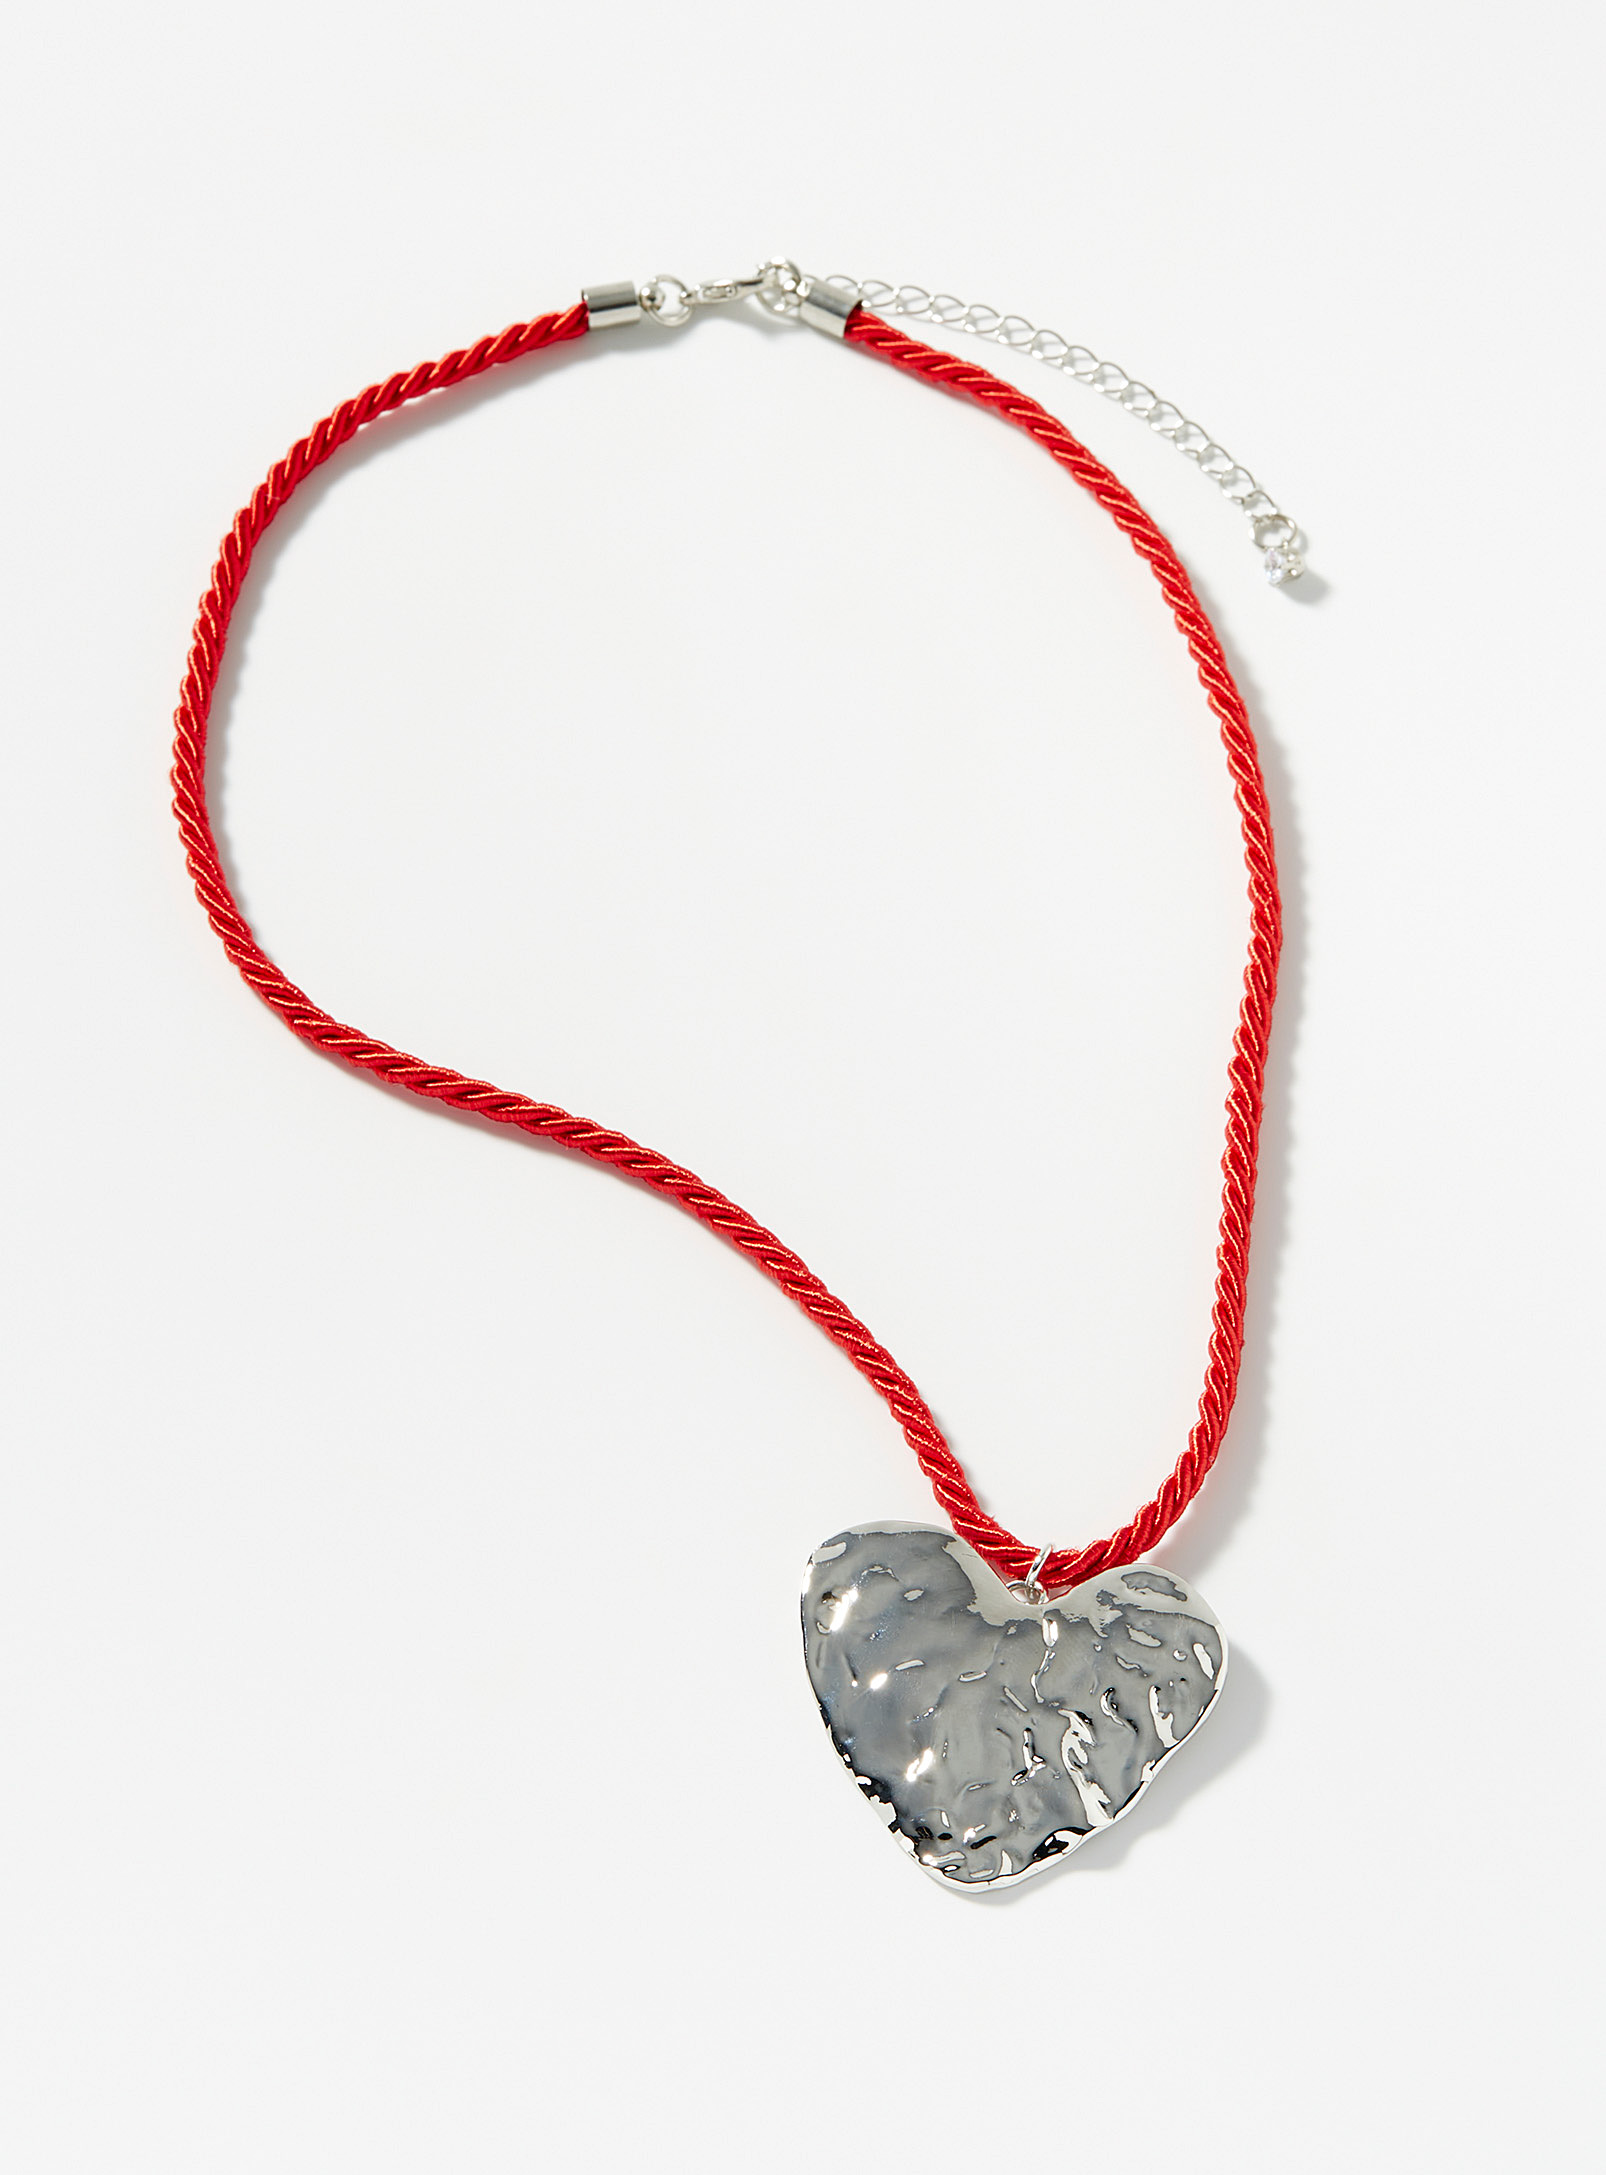 Simons - Women's Hammered heart cord necklace